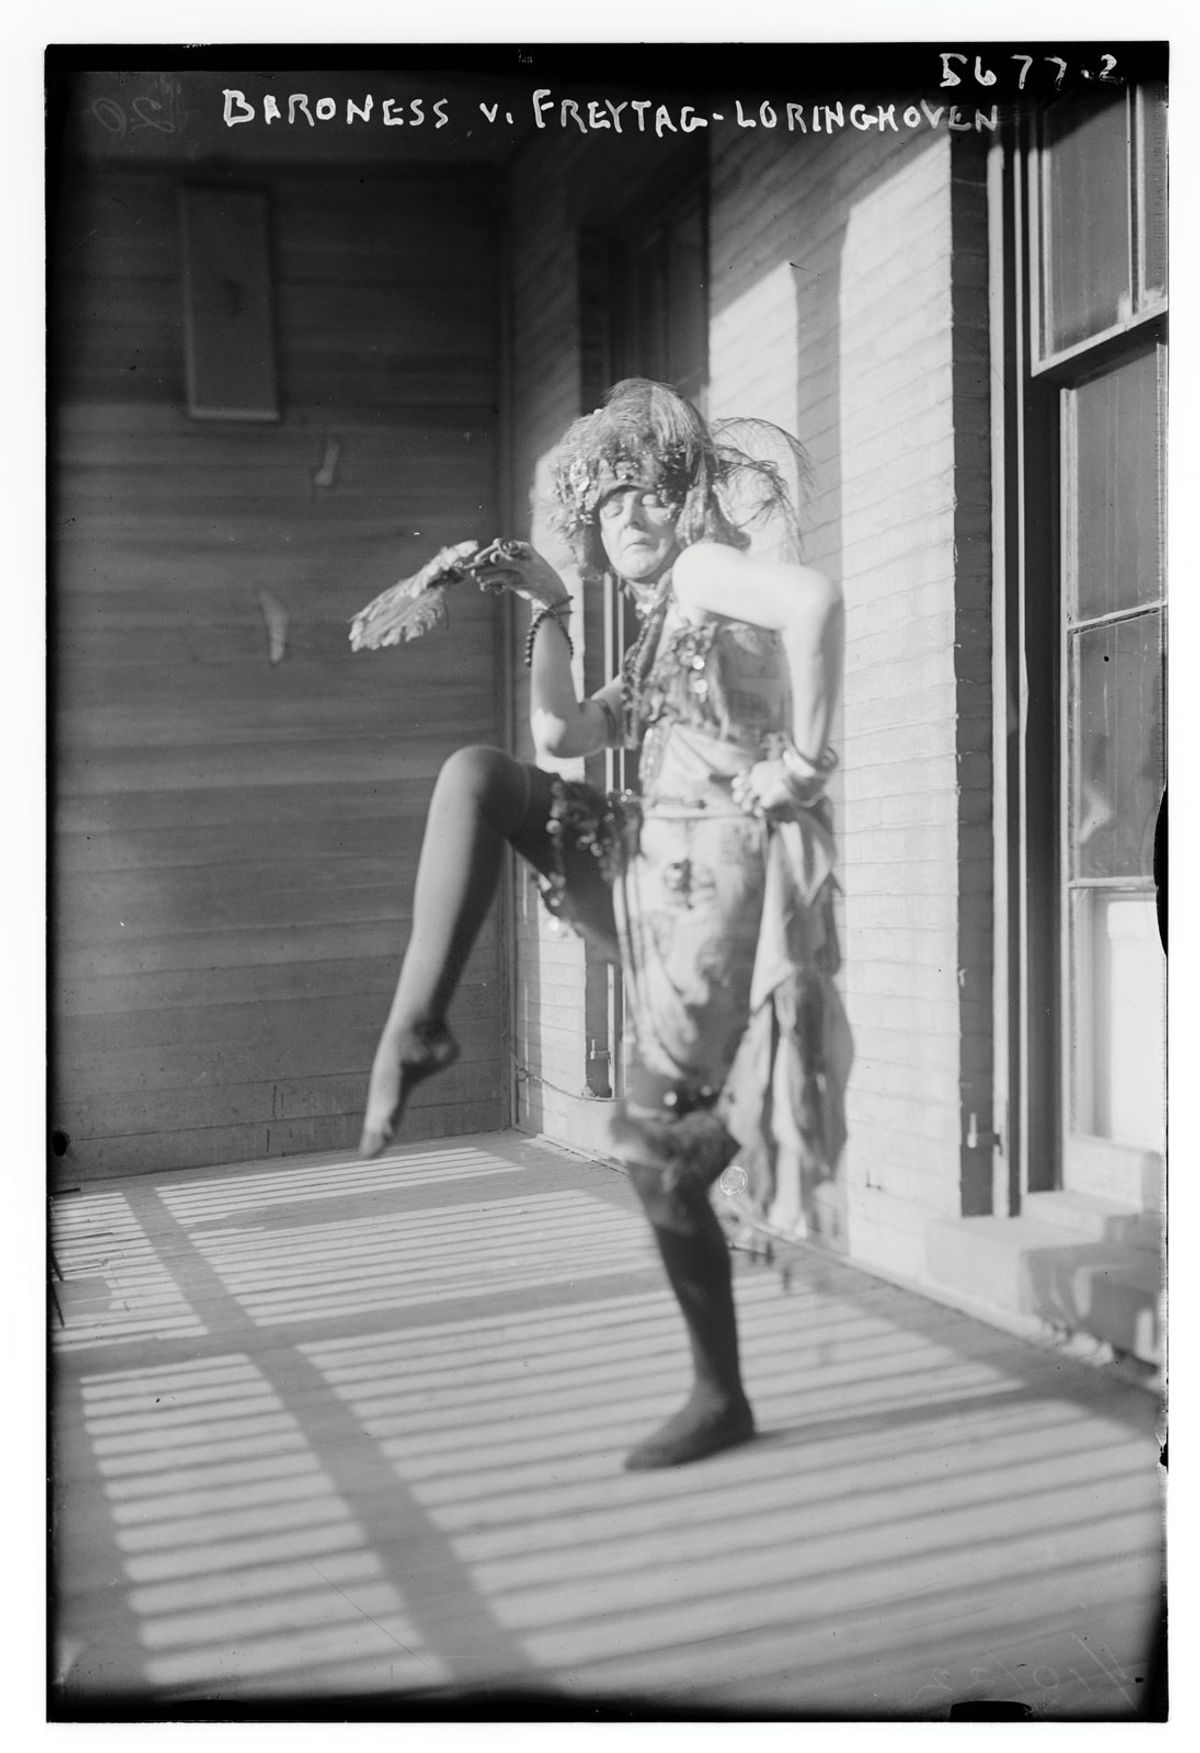 Baroness Elsa von Freytag-Loringhoven pictured around 1920-25 © Bain News Service photograph collection/American Library of Congress